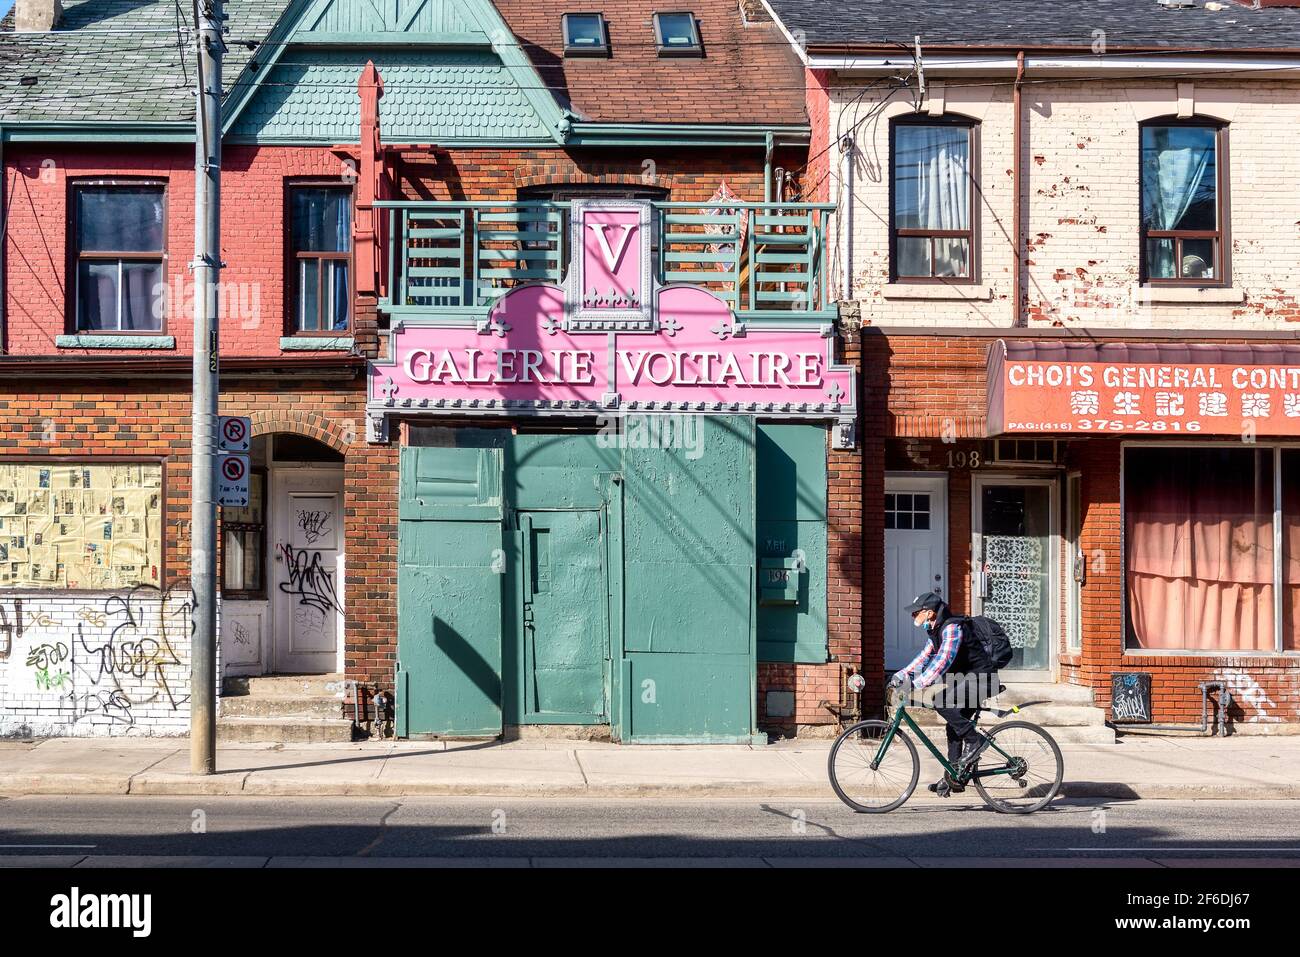 Gallery Voltaire on a vintage house with purple and green colors in Bathurst Street Stock Photo